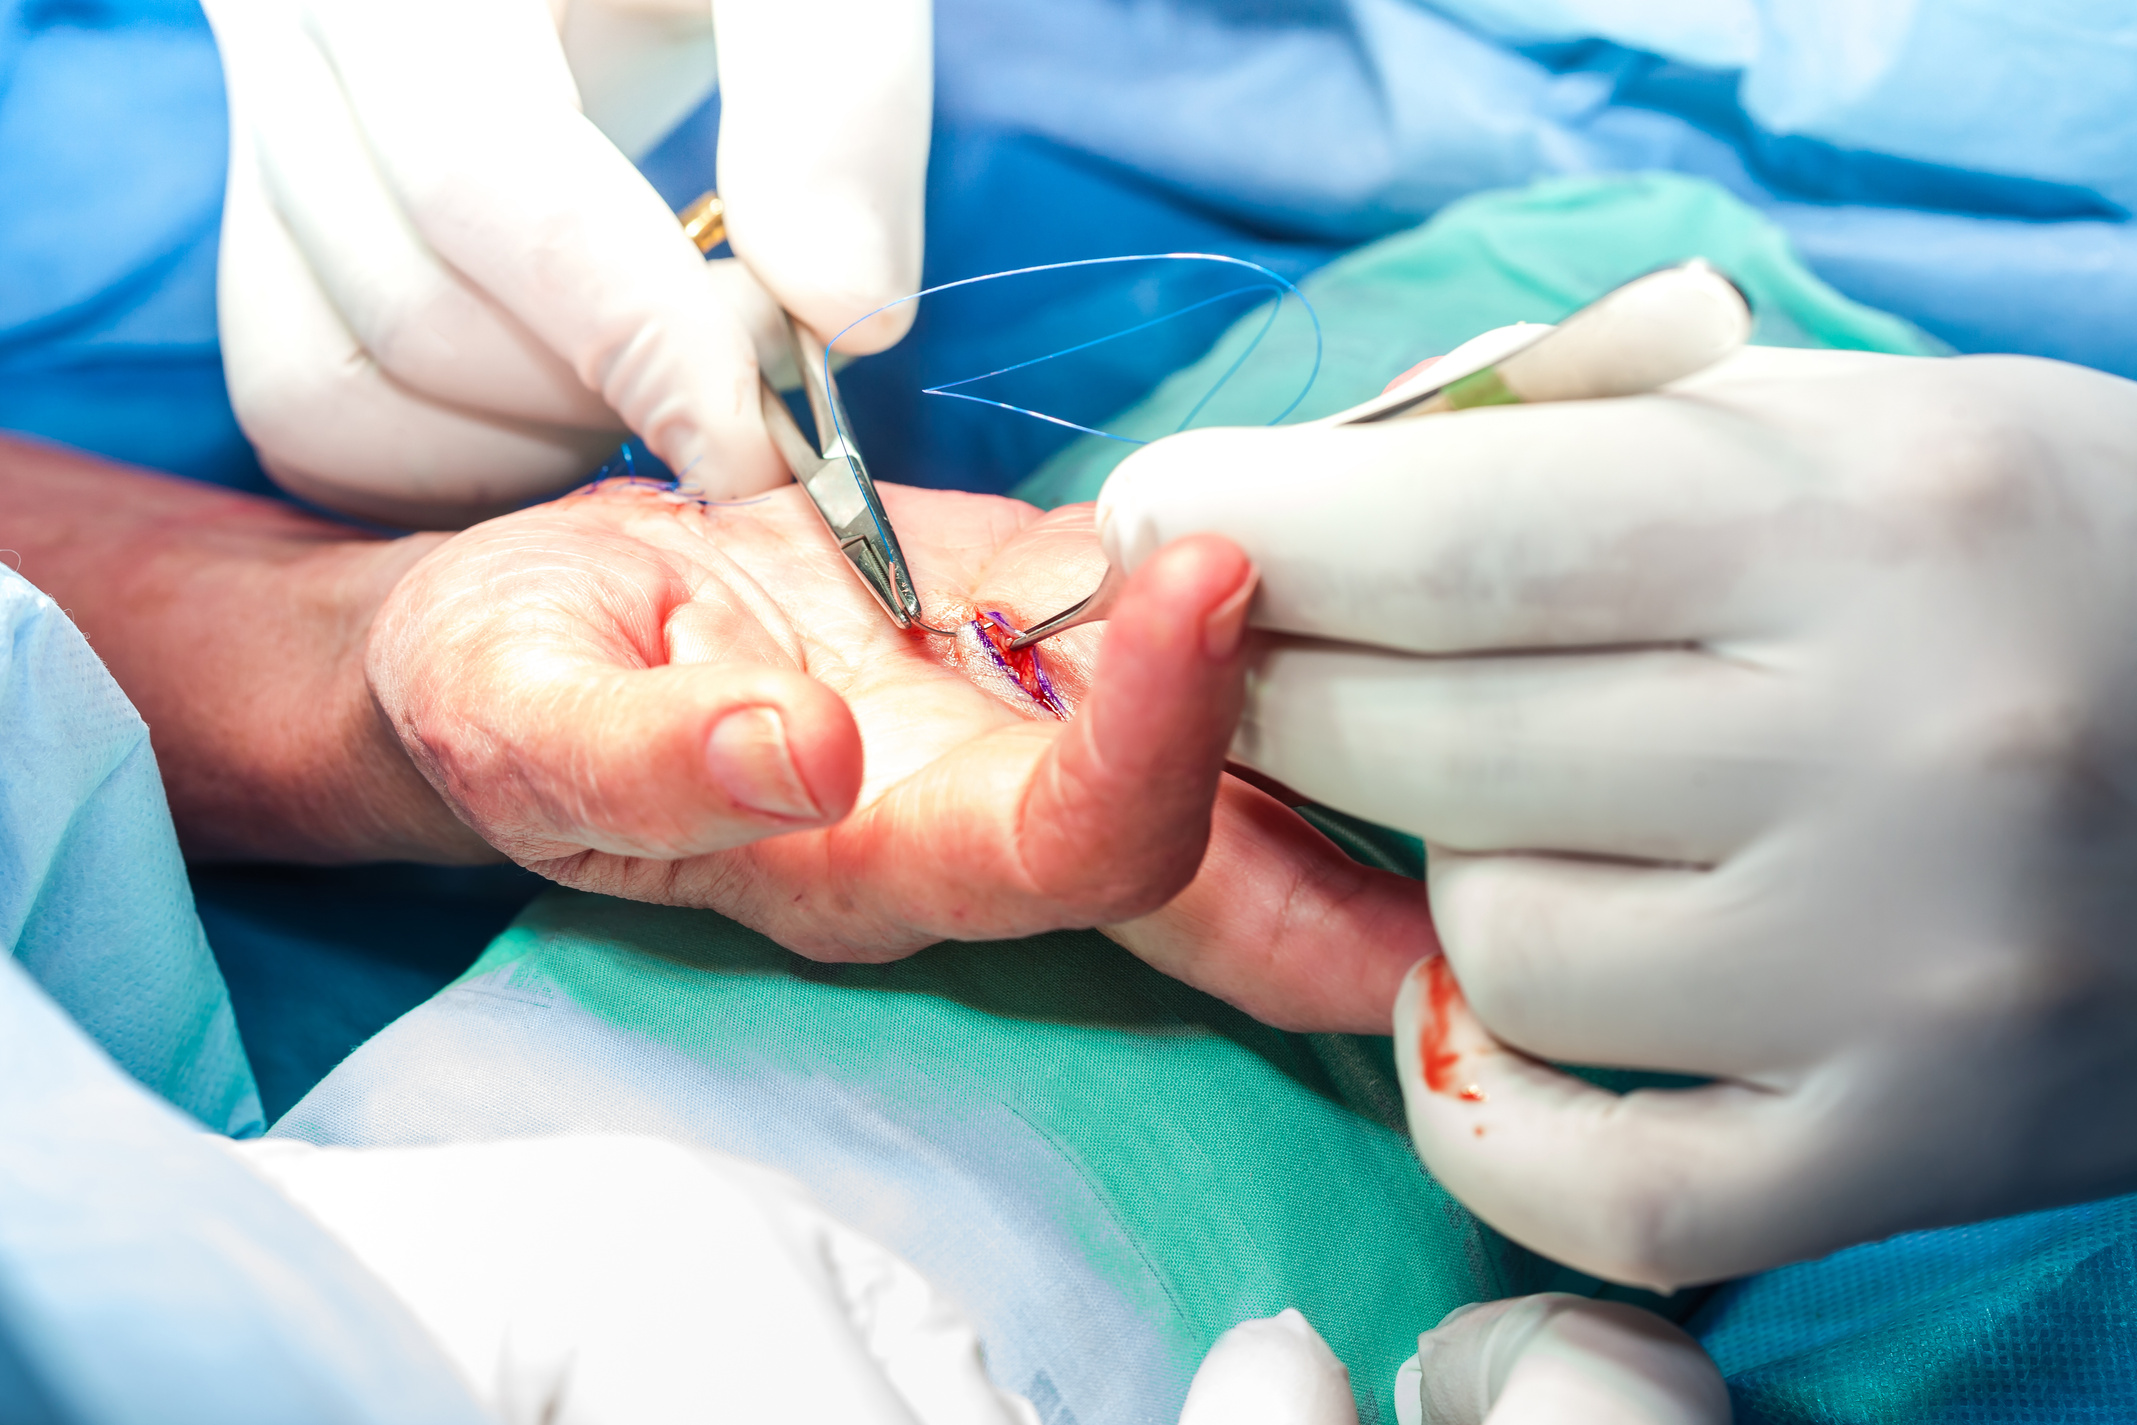 Surgeon suturing the hand of a patient at the end of surgery